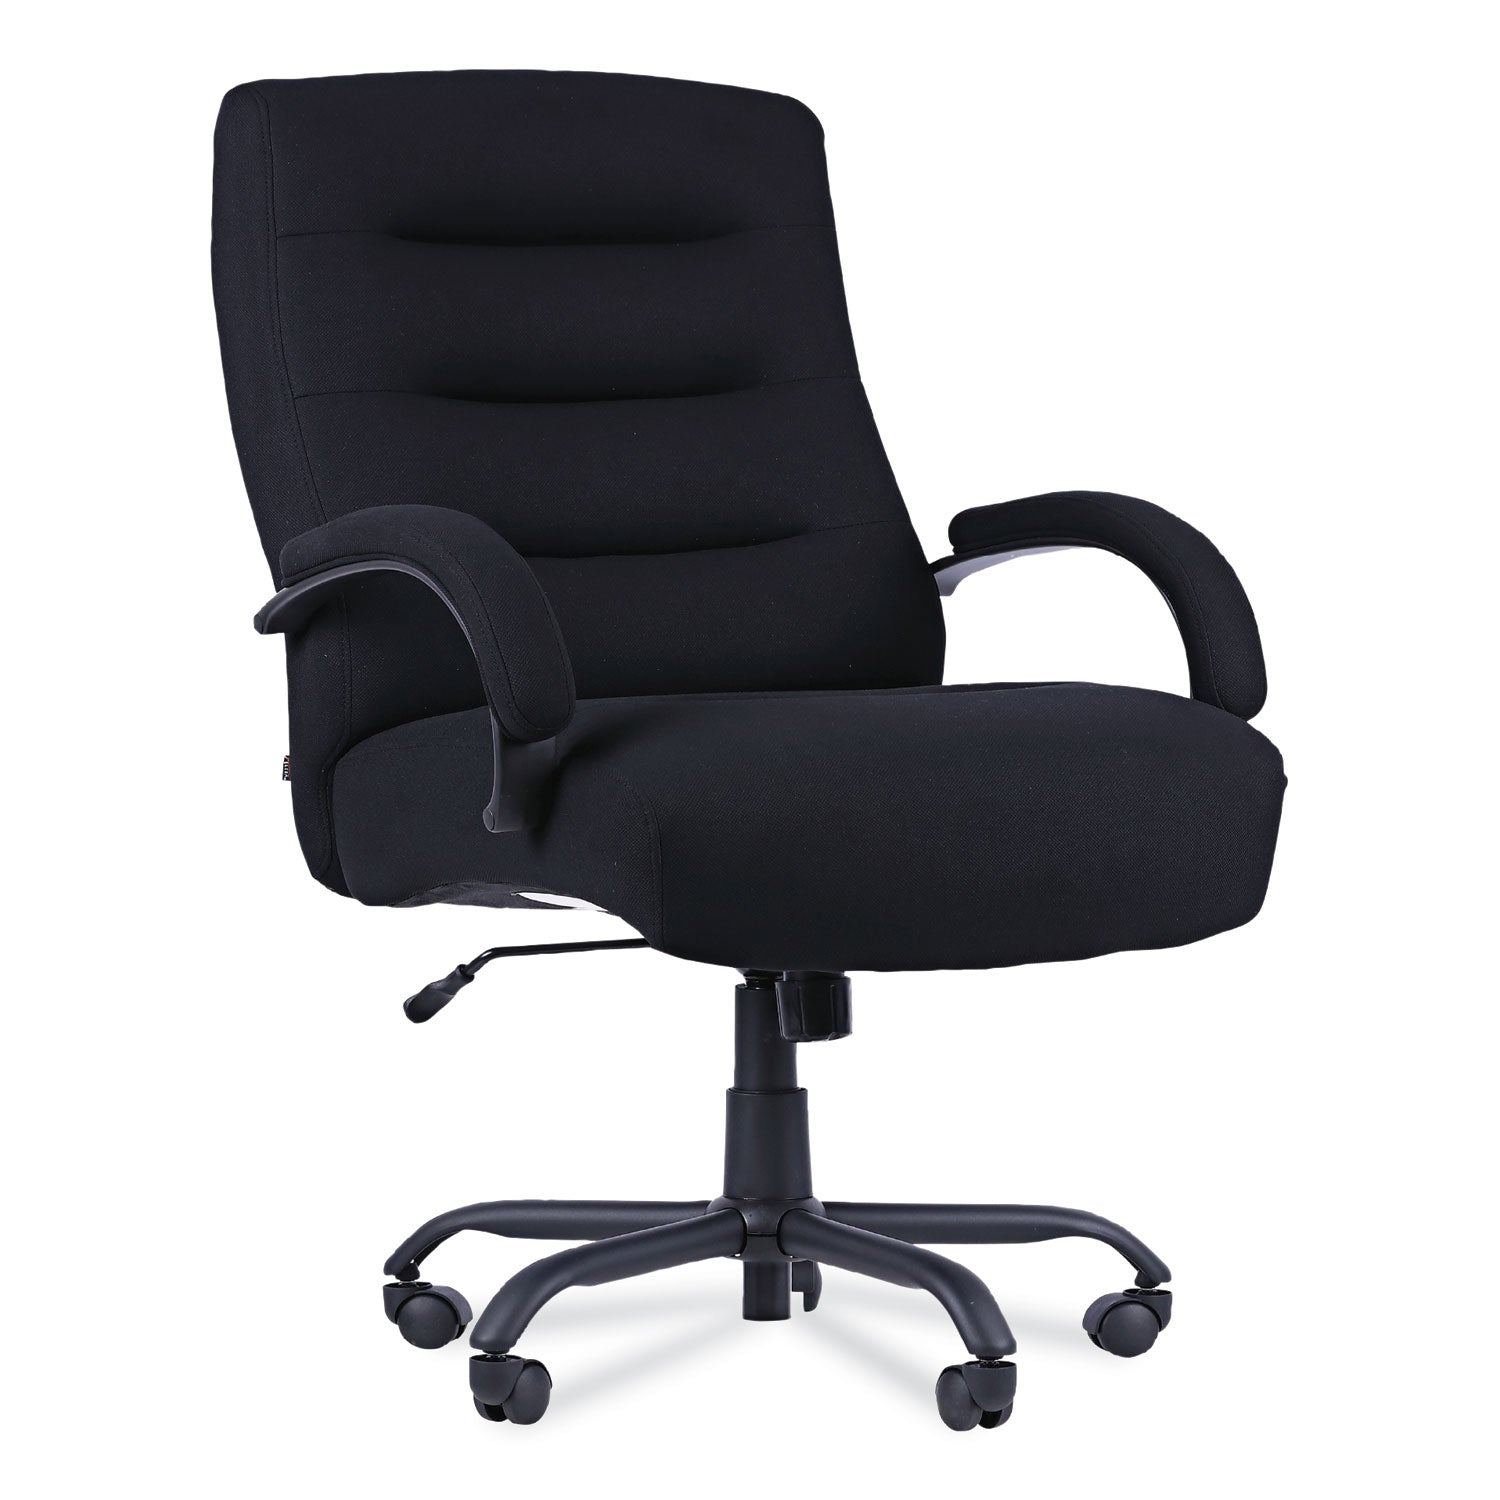 alera-kesson-series-big-tall-office-chair-supports-up-to-450-lb-215-to-254-seat-height-black_aleks4510 - 1